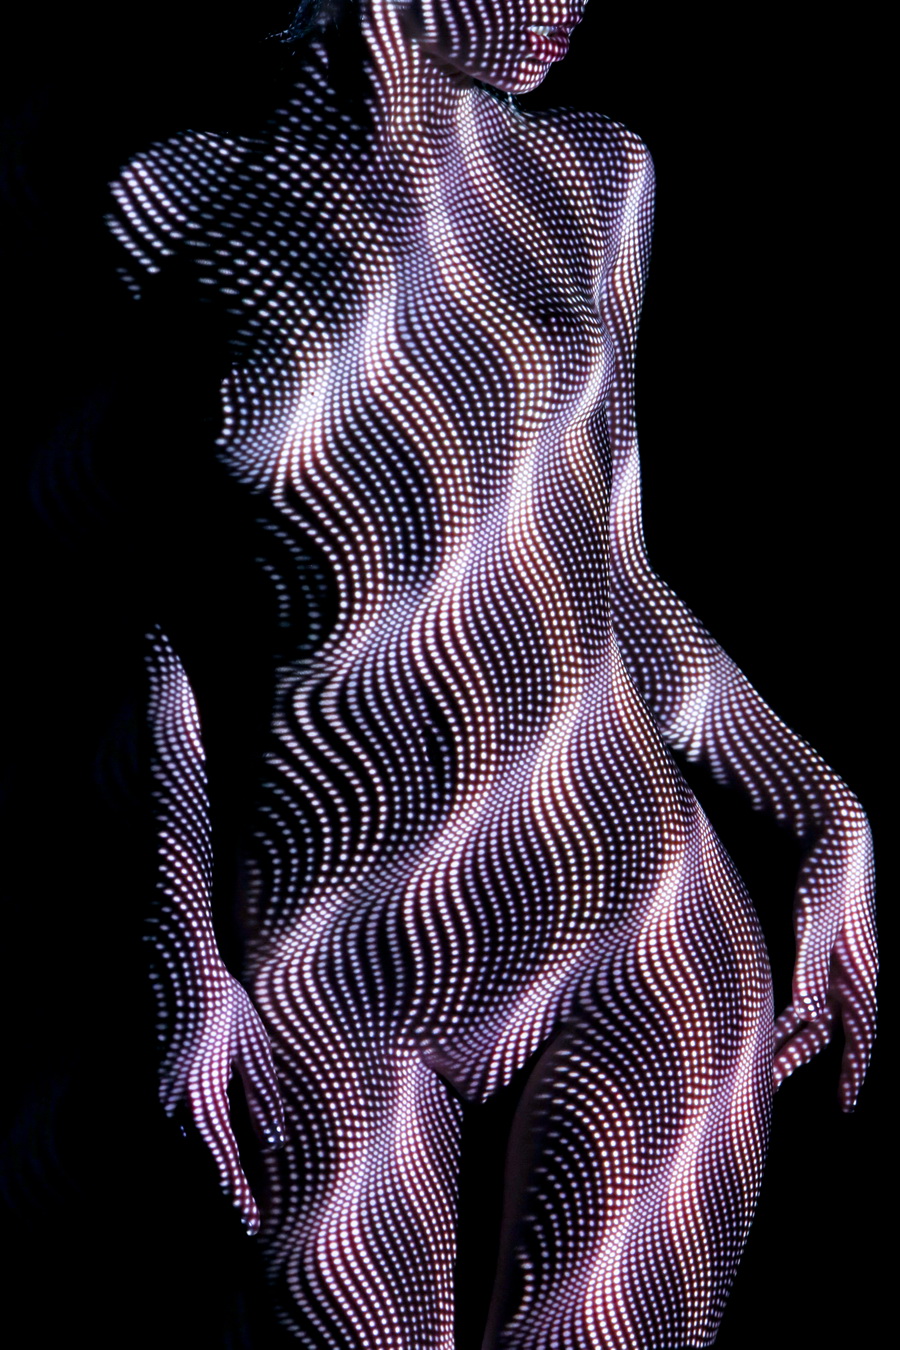 Seductive Photos of the Female Form Dressed Only in Light 